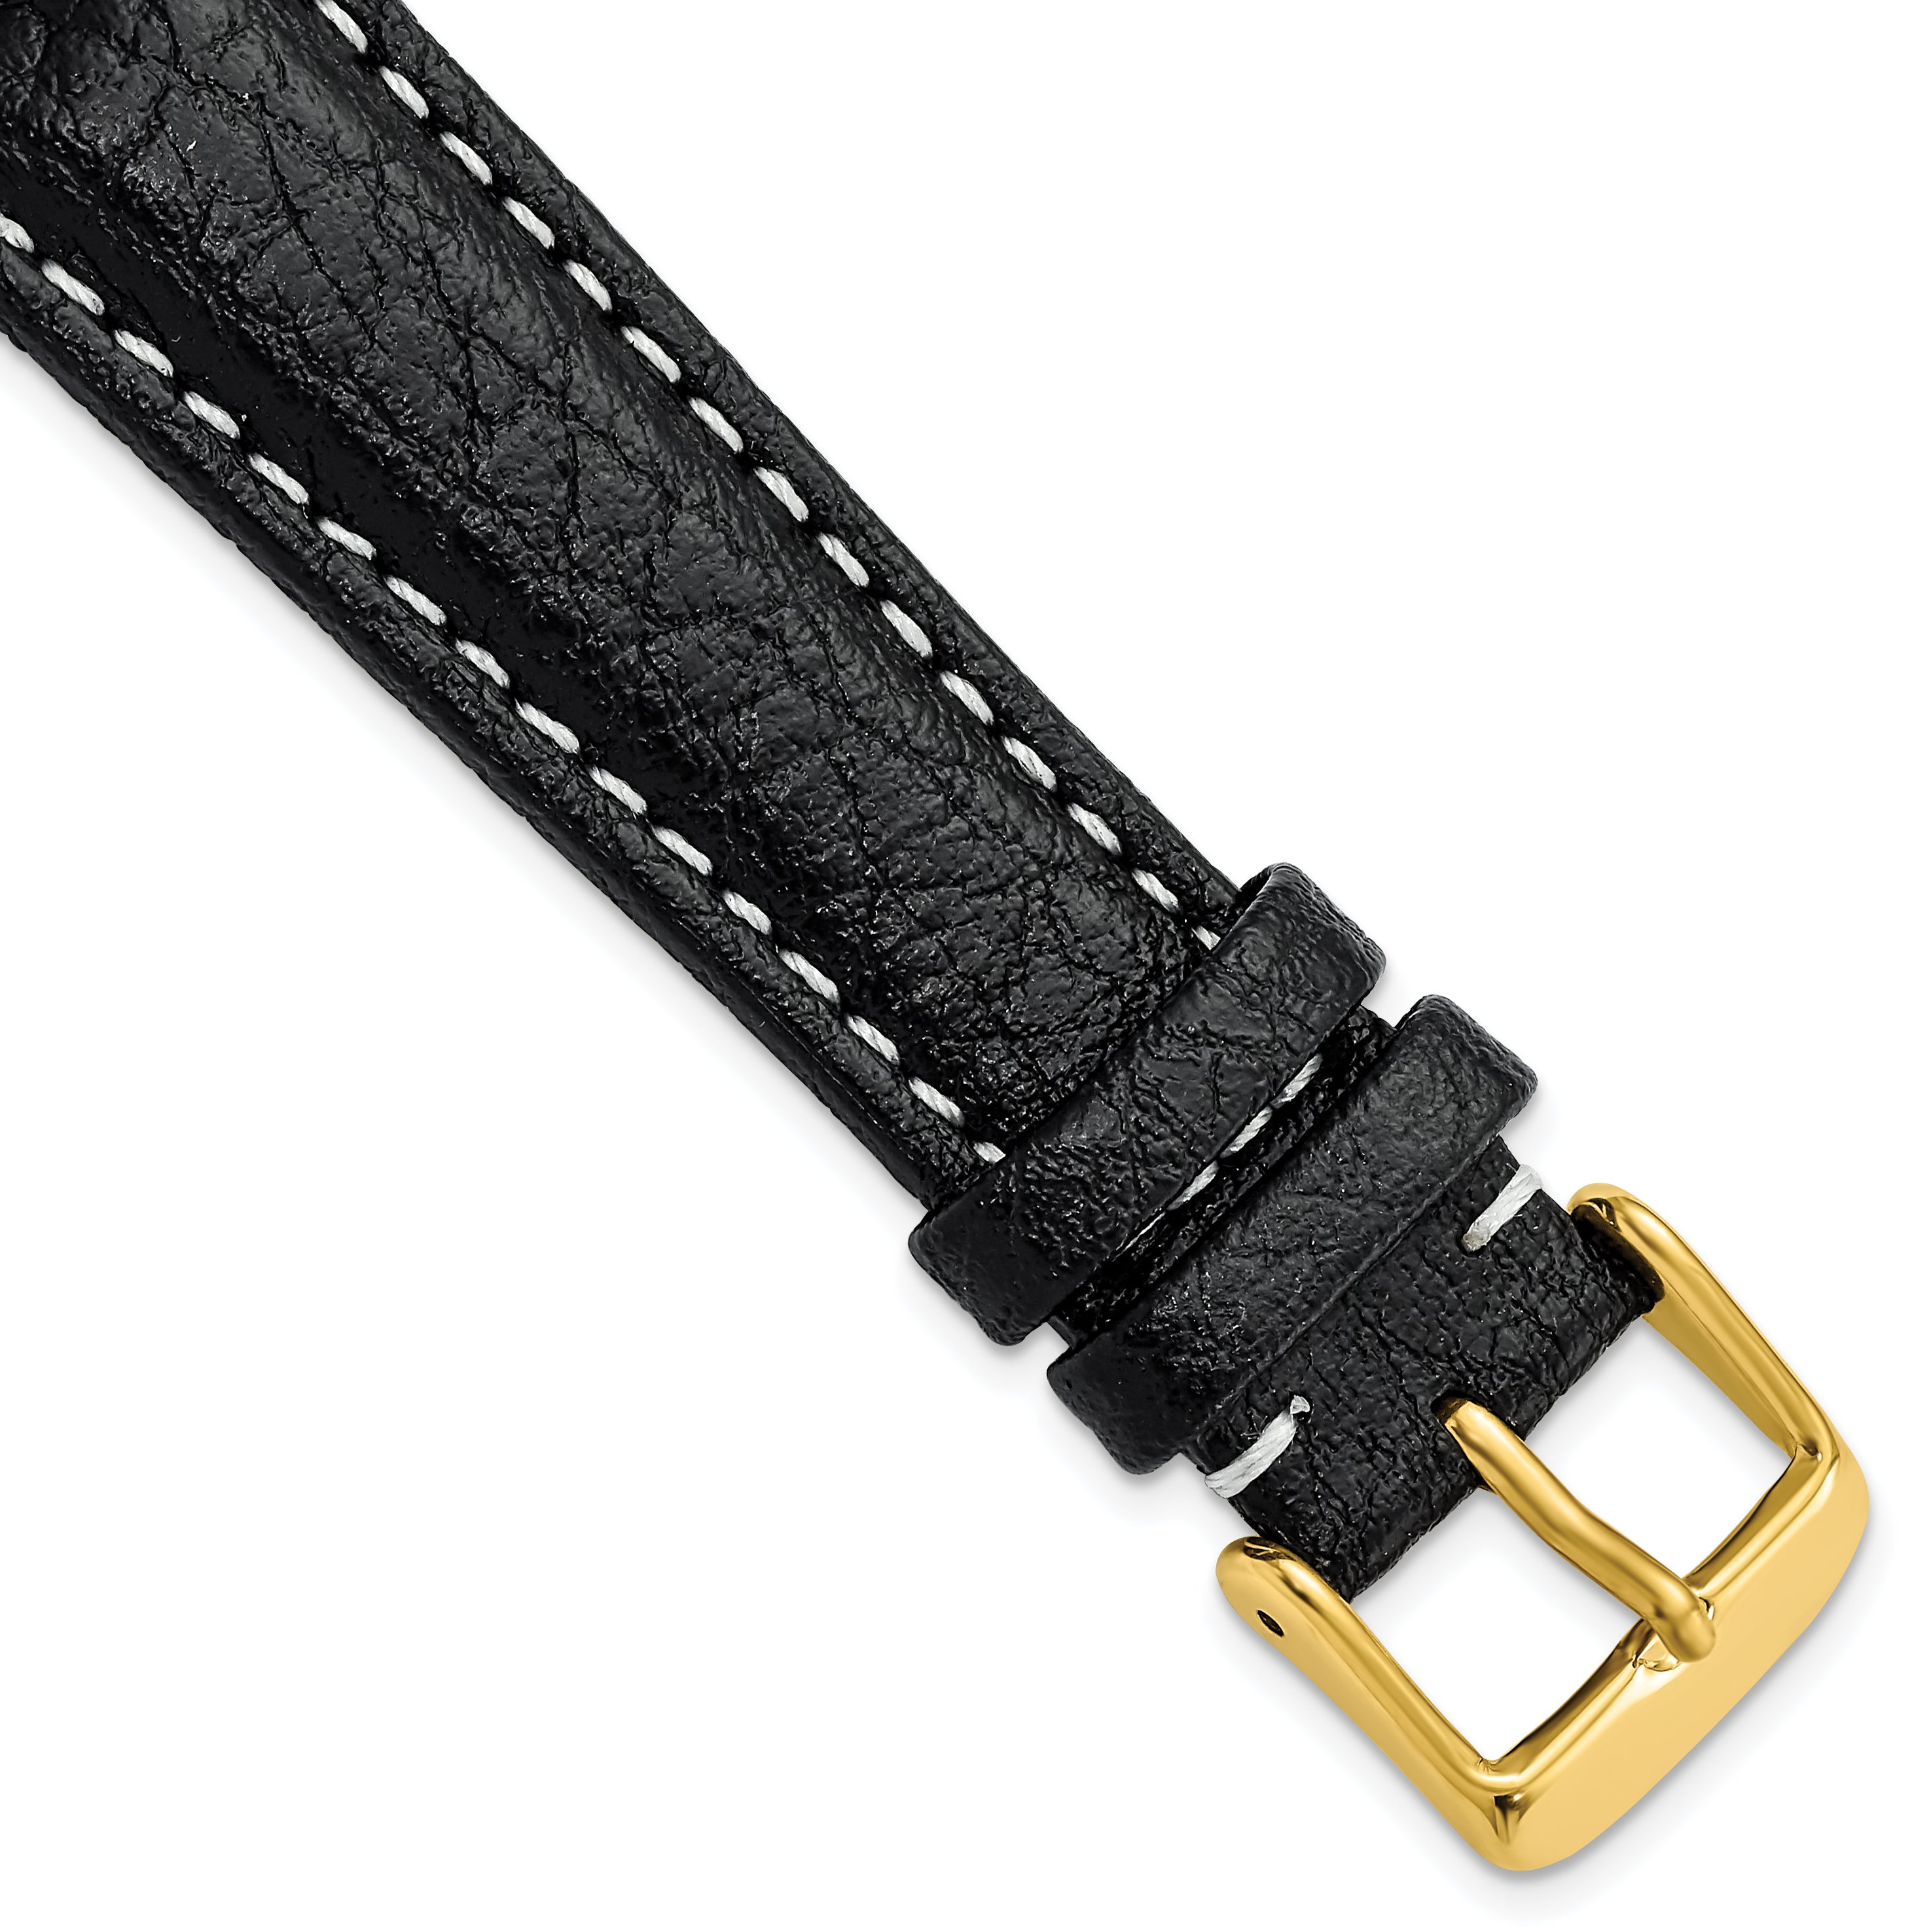 DeBeer 19mm Black Sport Leather with White Stitching and Gold-tone Buckle 7.5 inch Watch Band